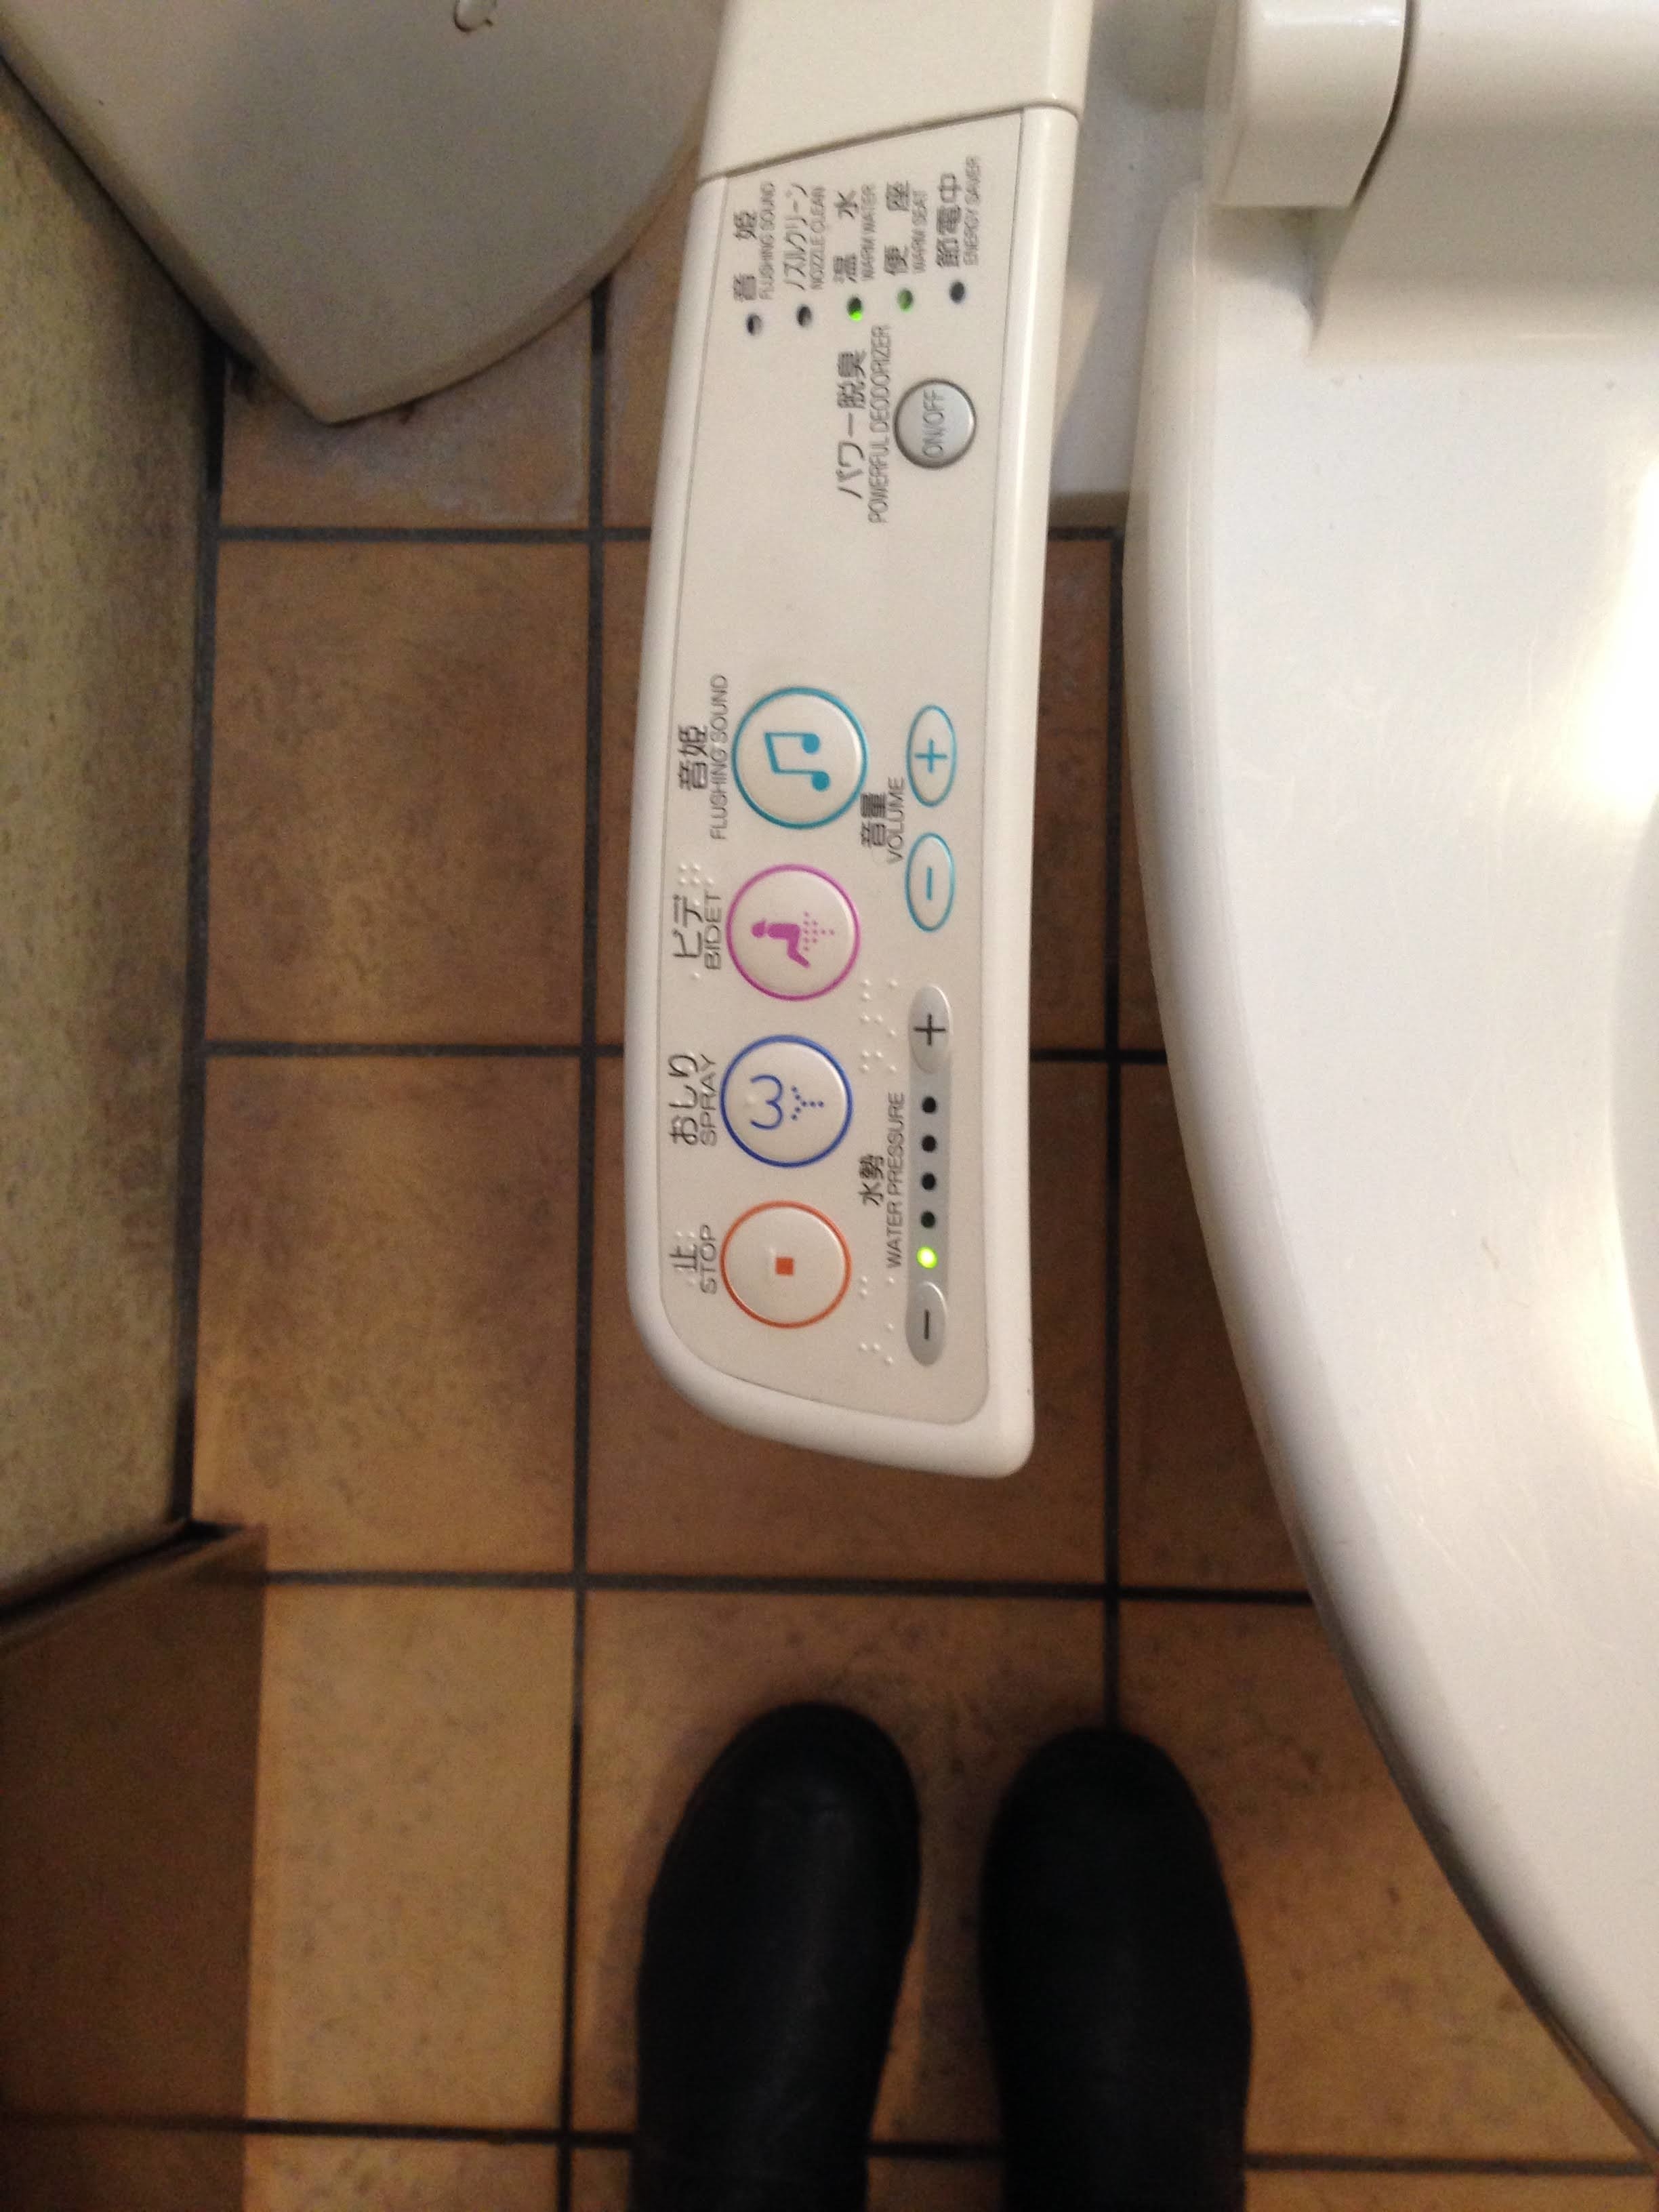 Control panel for a Japanese toilet